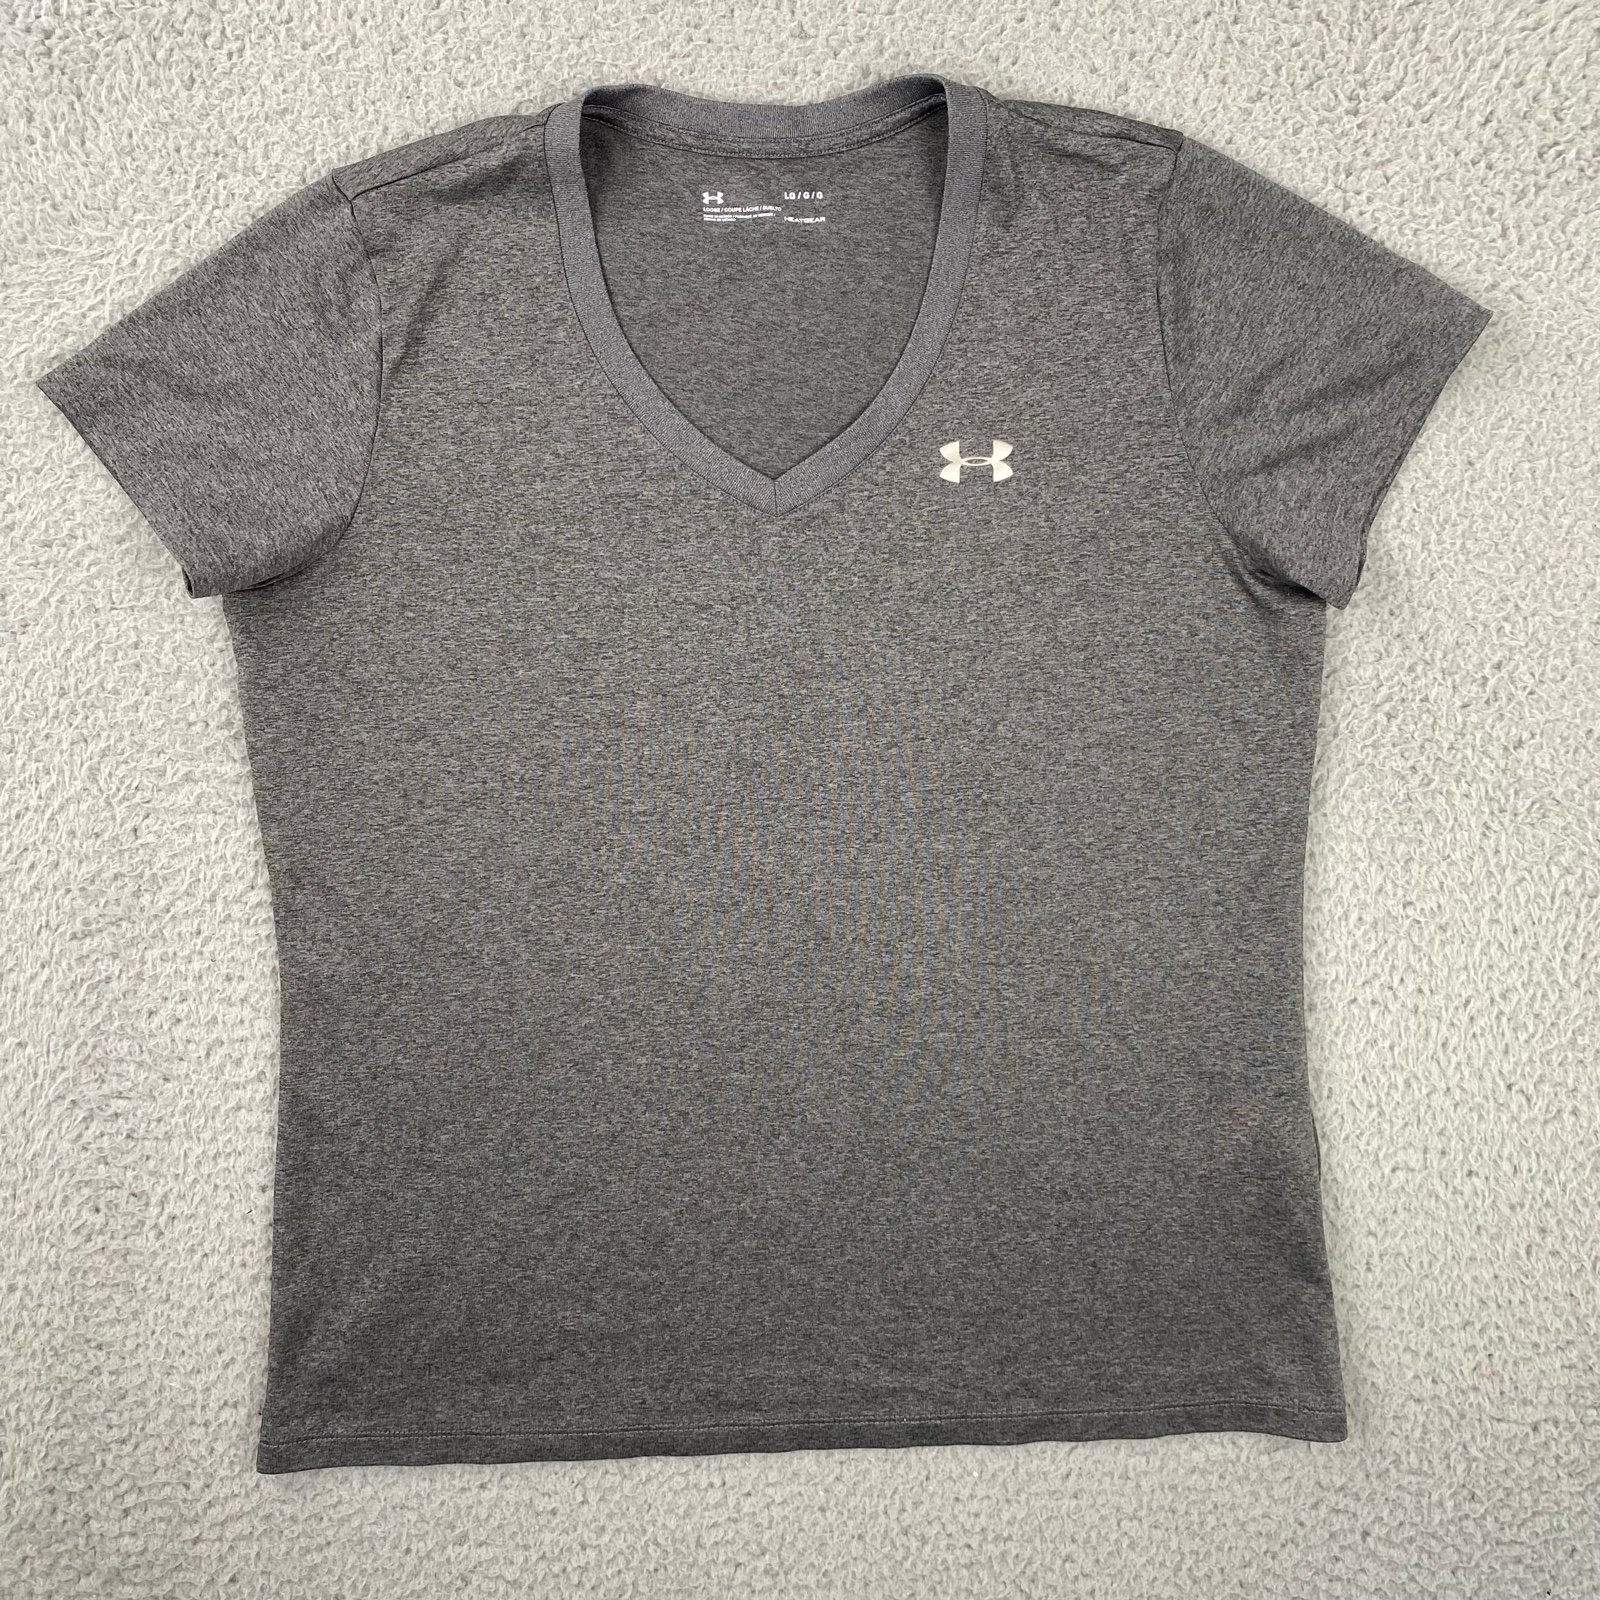 Under Armour Womens Solid Tech V-Neck Shirt Carbon Gray Loose Fit Large Heatgear EZbdBeNao